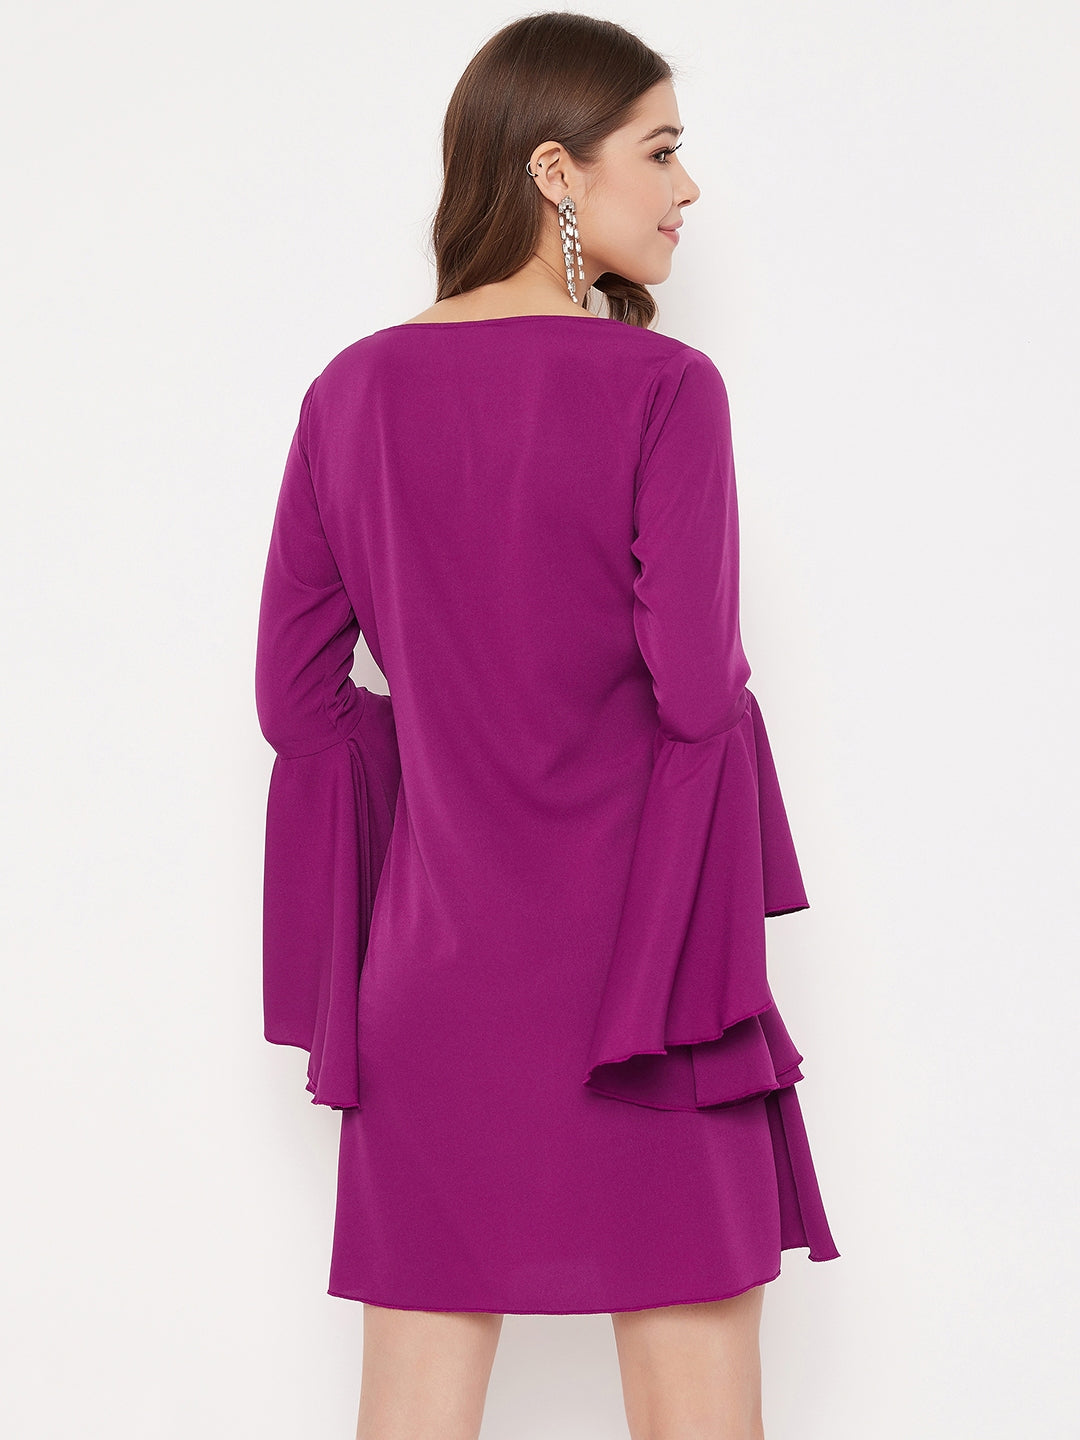 Purple dress with sleeves - Buy and Slay